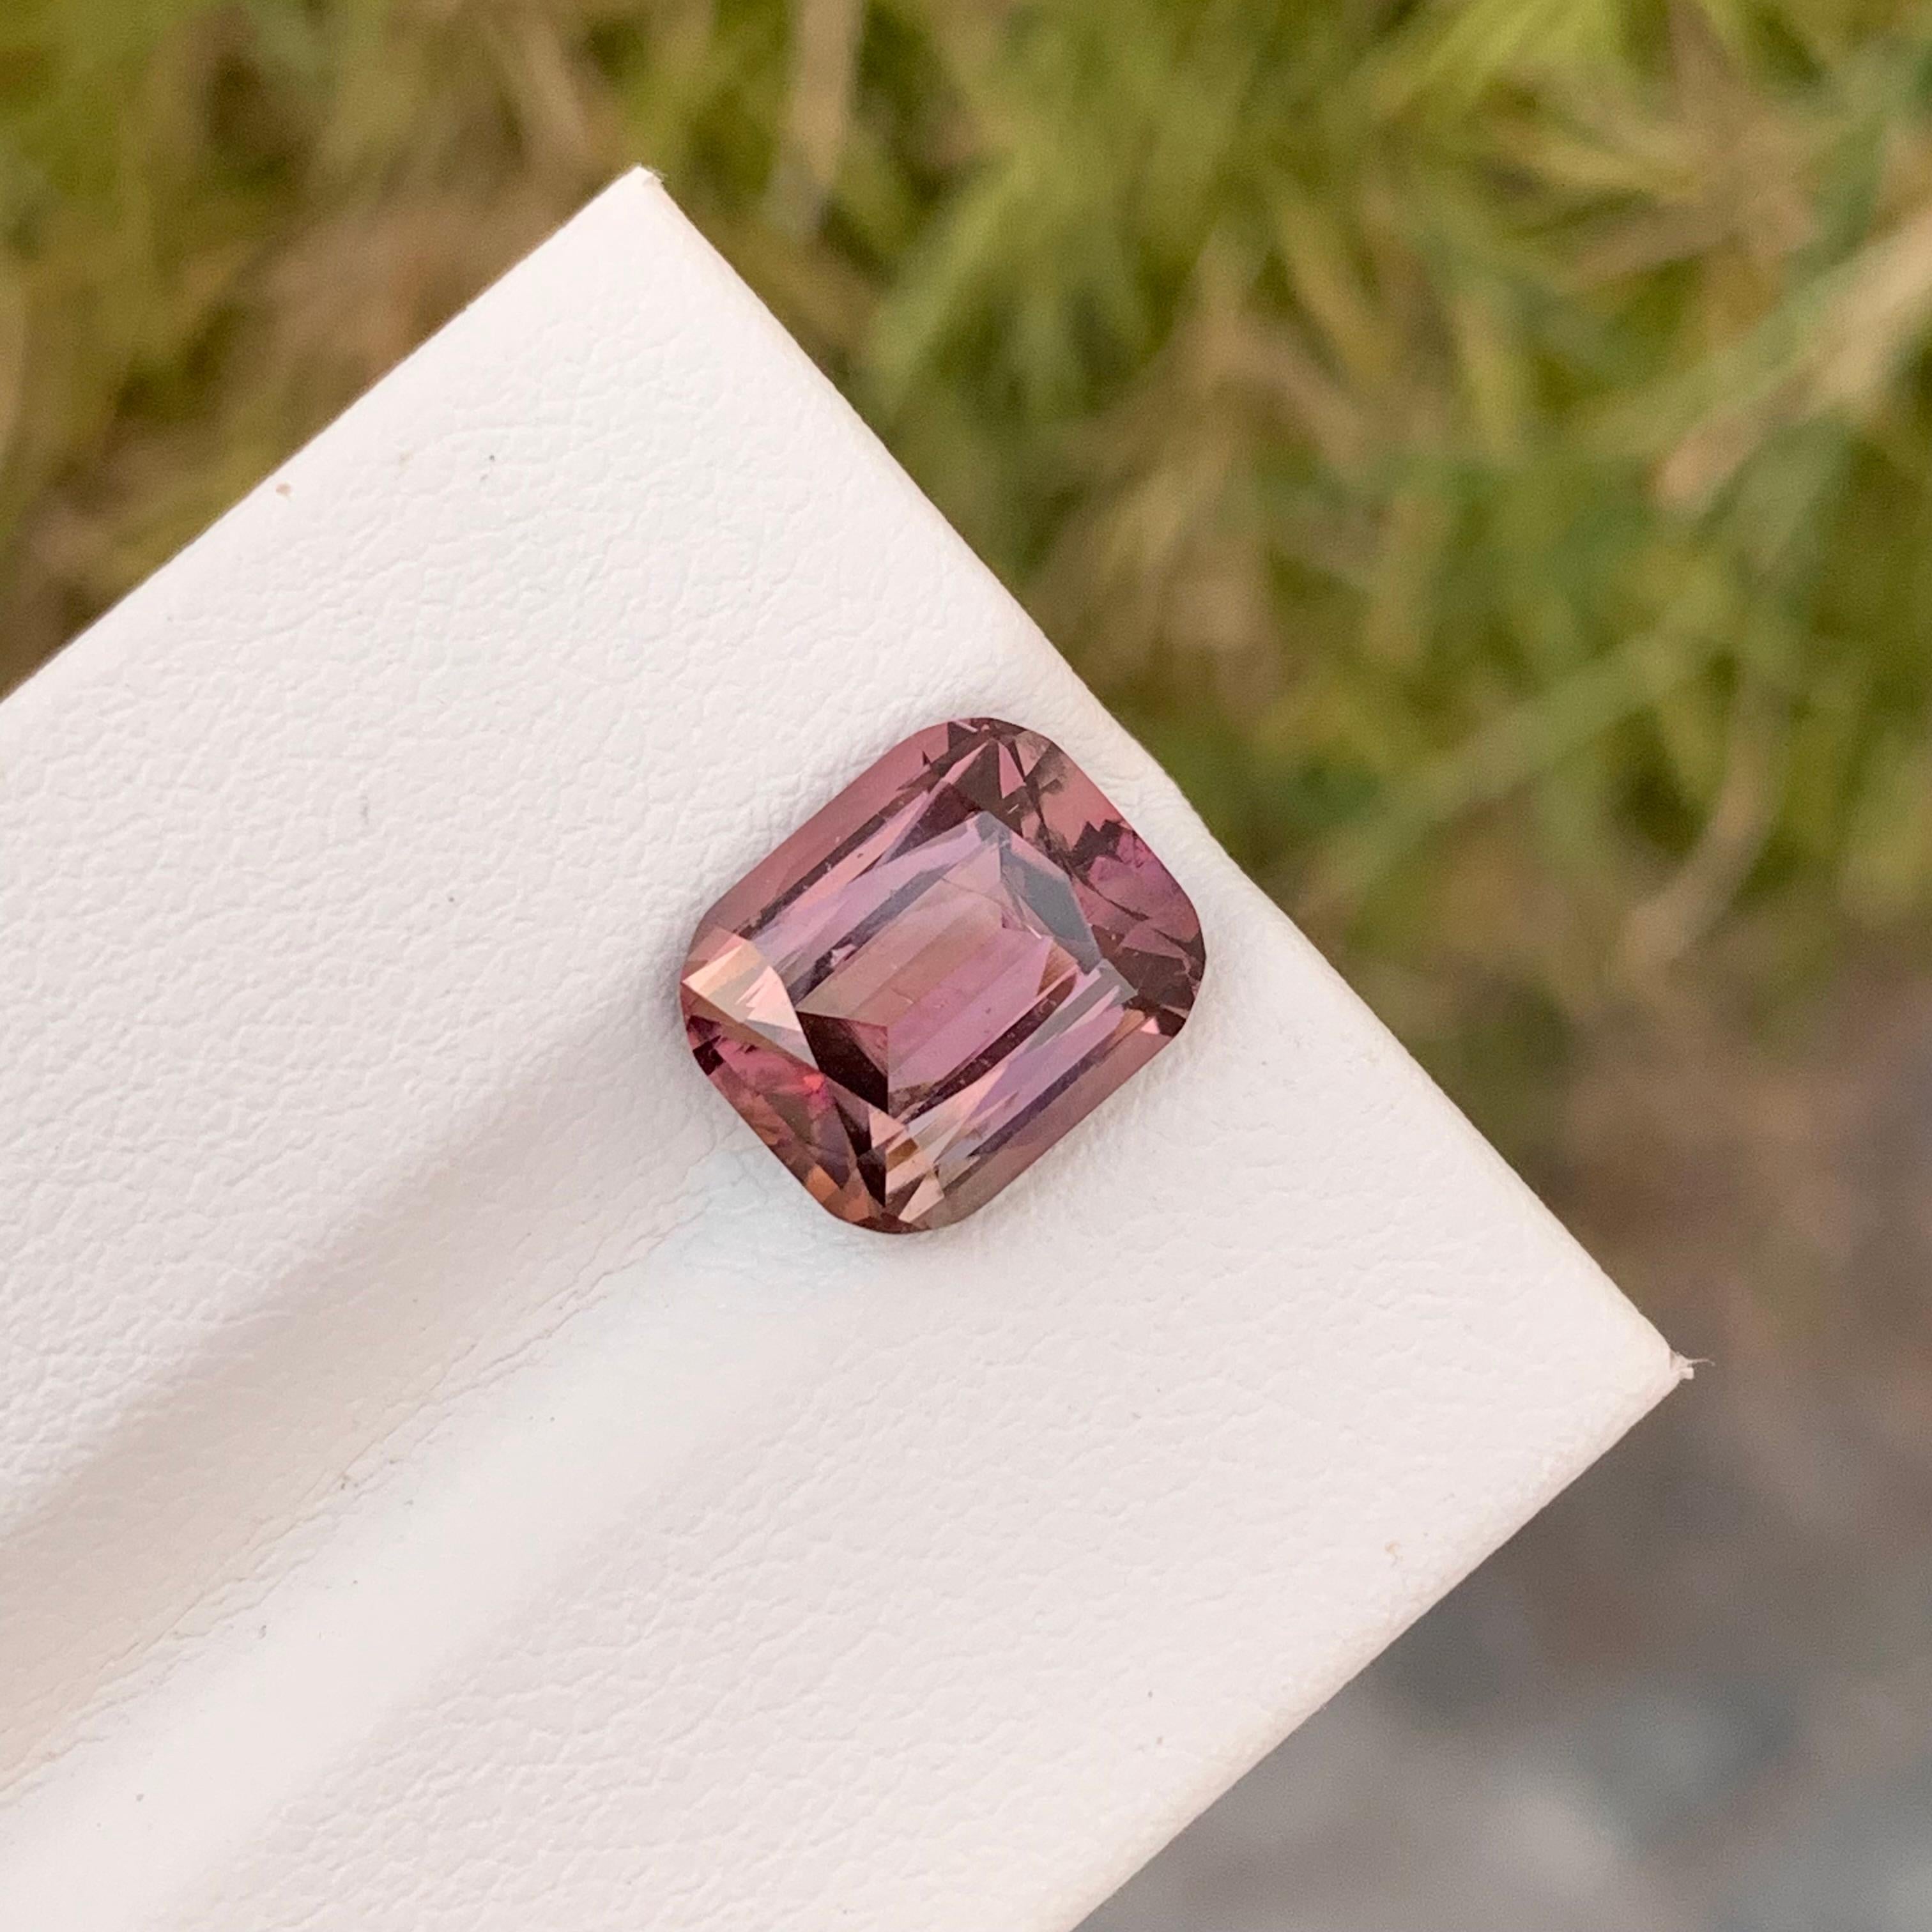 3.75 Carat Pretty Loose Peach Pink Tourmaline Cushion Shape Gem From Afghanistan For Sale 1